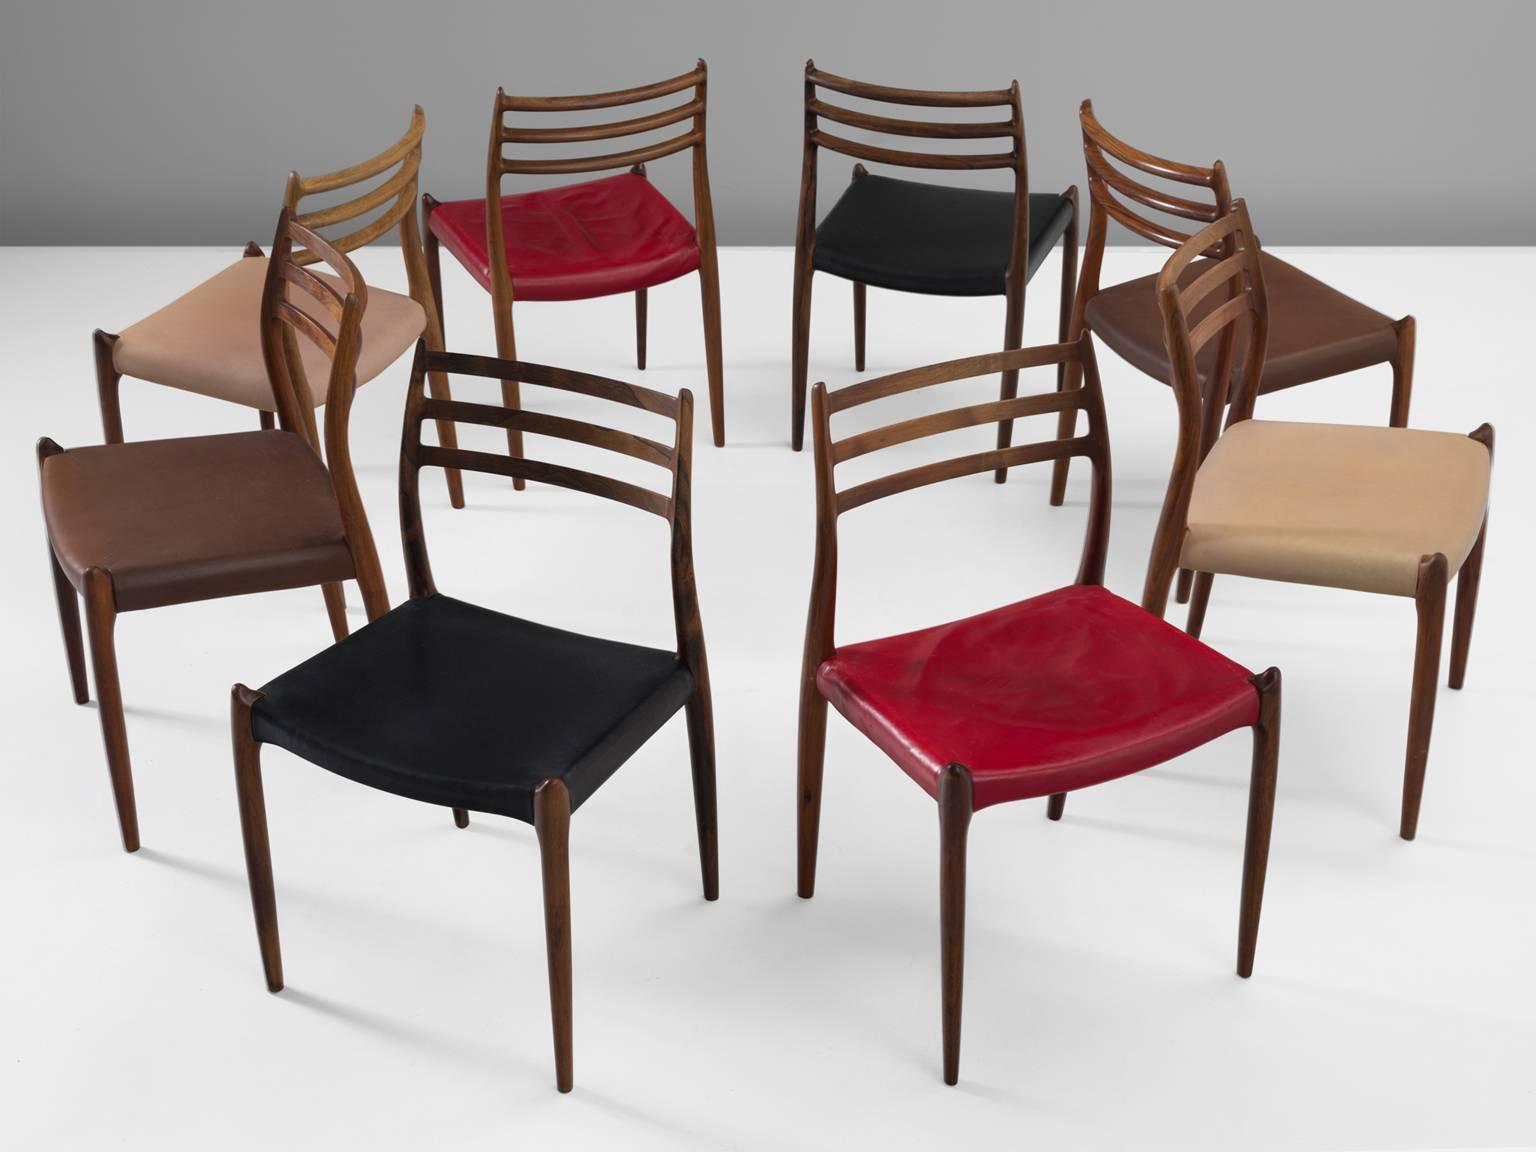 Set of 16 chairs, in rosewood and leather by Niels Otto Møller, for J.L. Møllers Møbelfabrik, Denmark 1960s.

Large set of rosewood dining chairs with different upholsteries, model without armrests. This design, 'model nr. 62', is by far one of